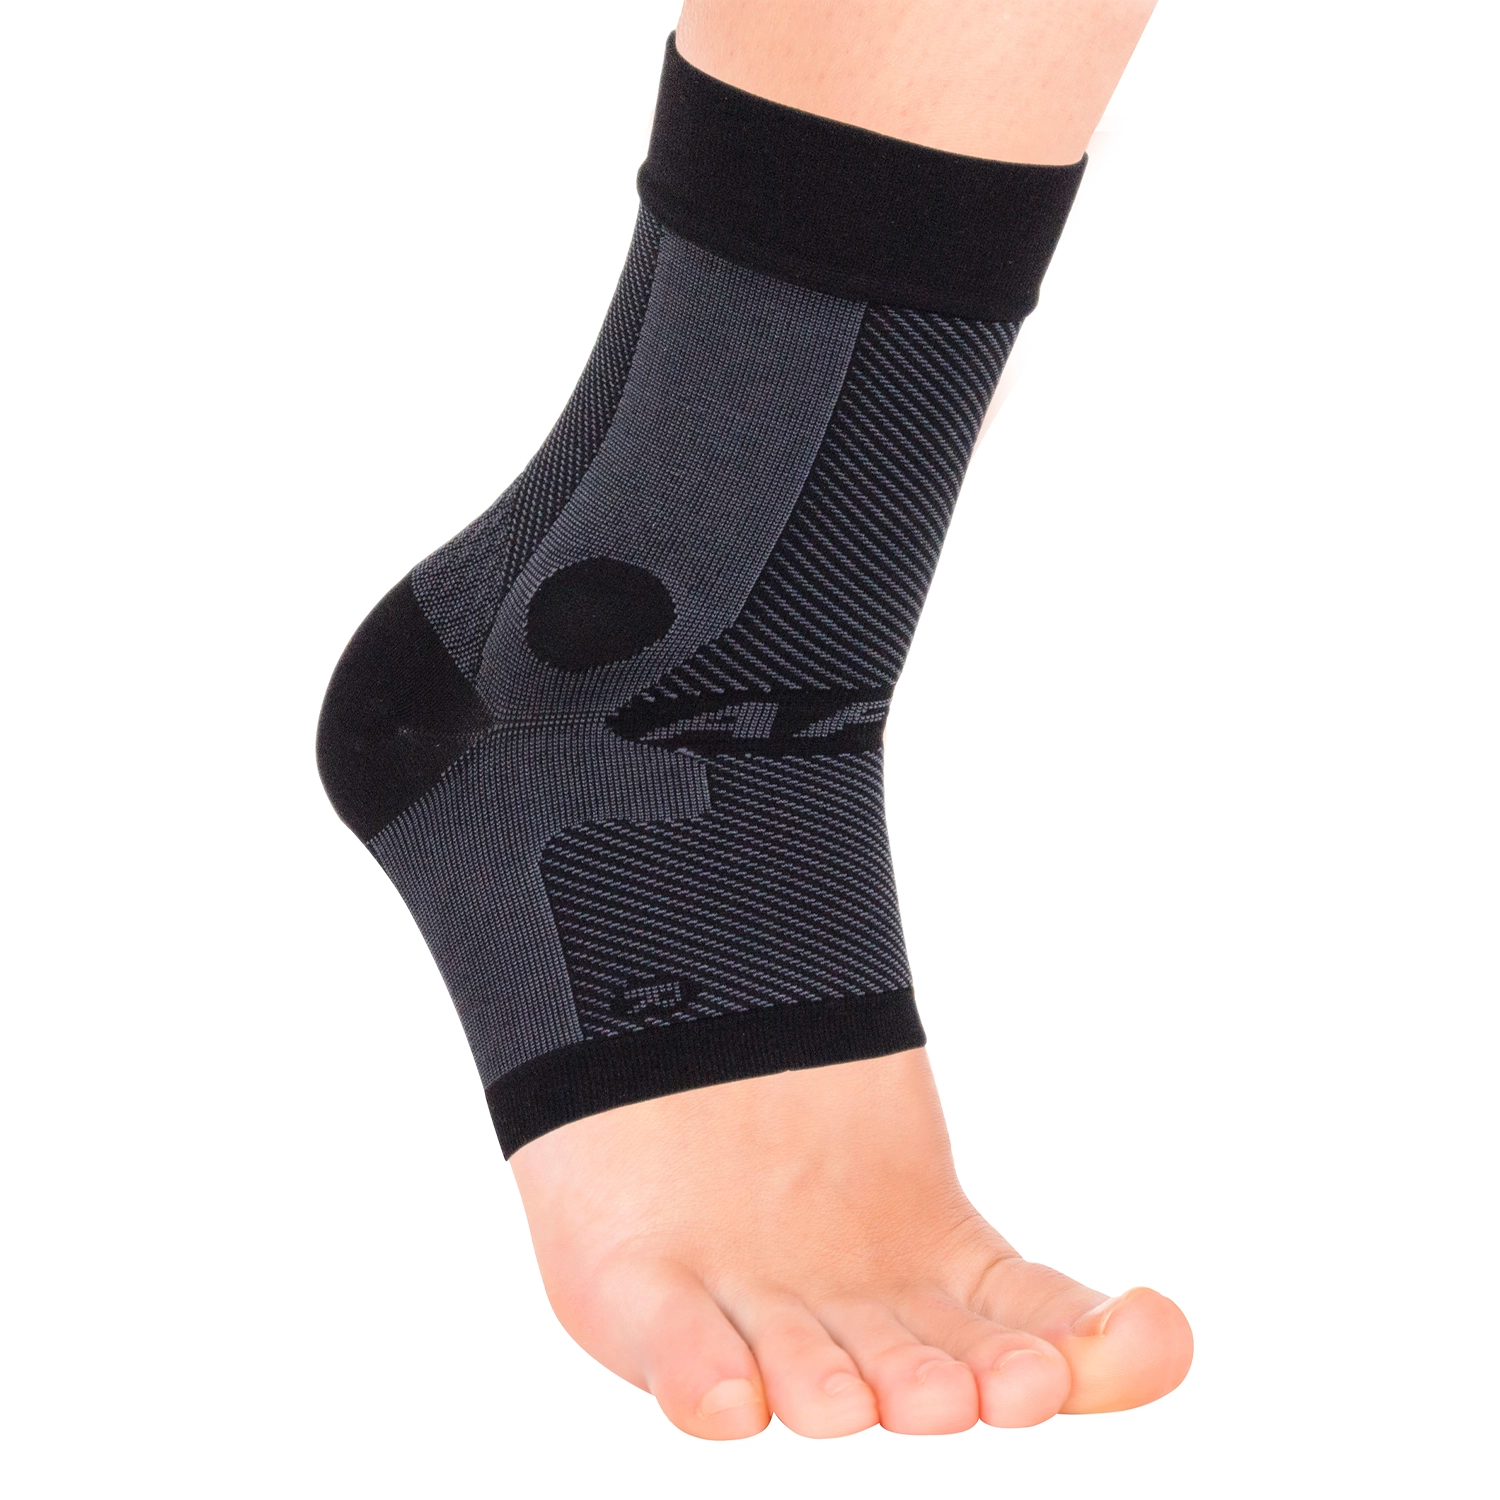 10 Best Hiking Knee Braces, Ankle Supports, Compression Sleeves